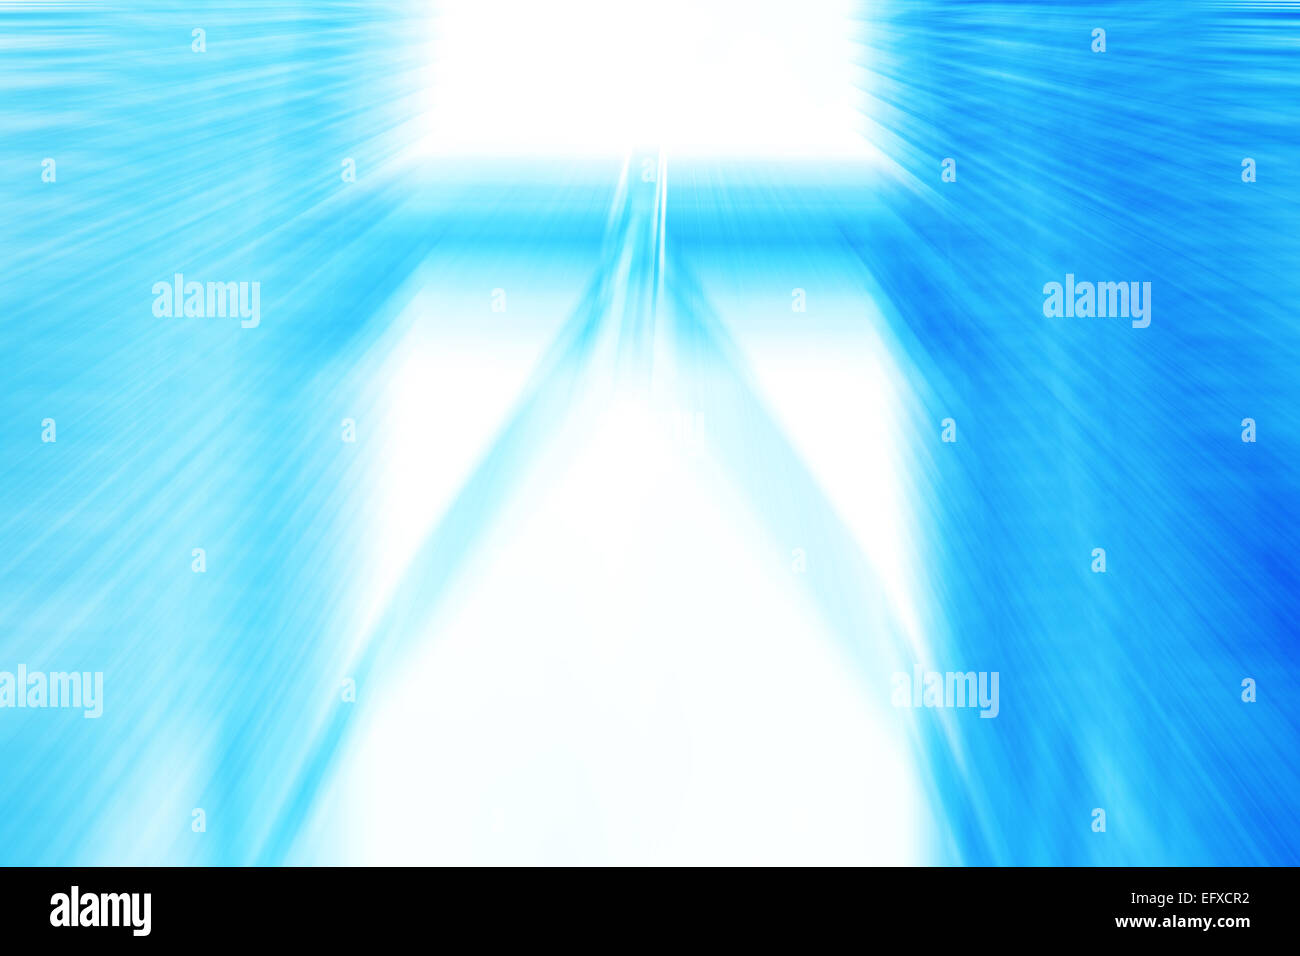 Abstract motion blurred high tech background. Stock Photo